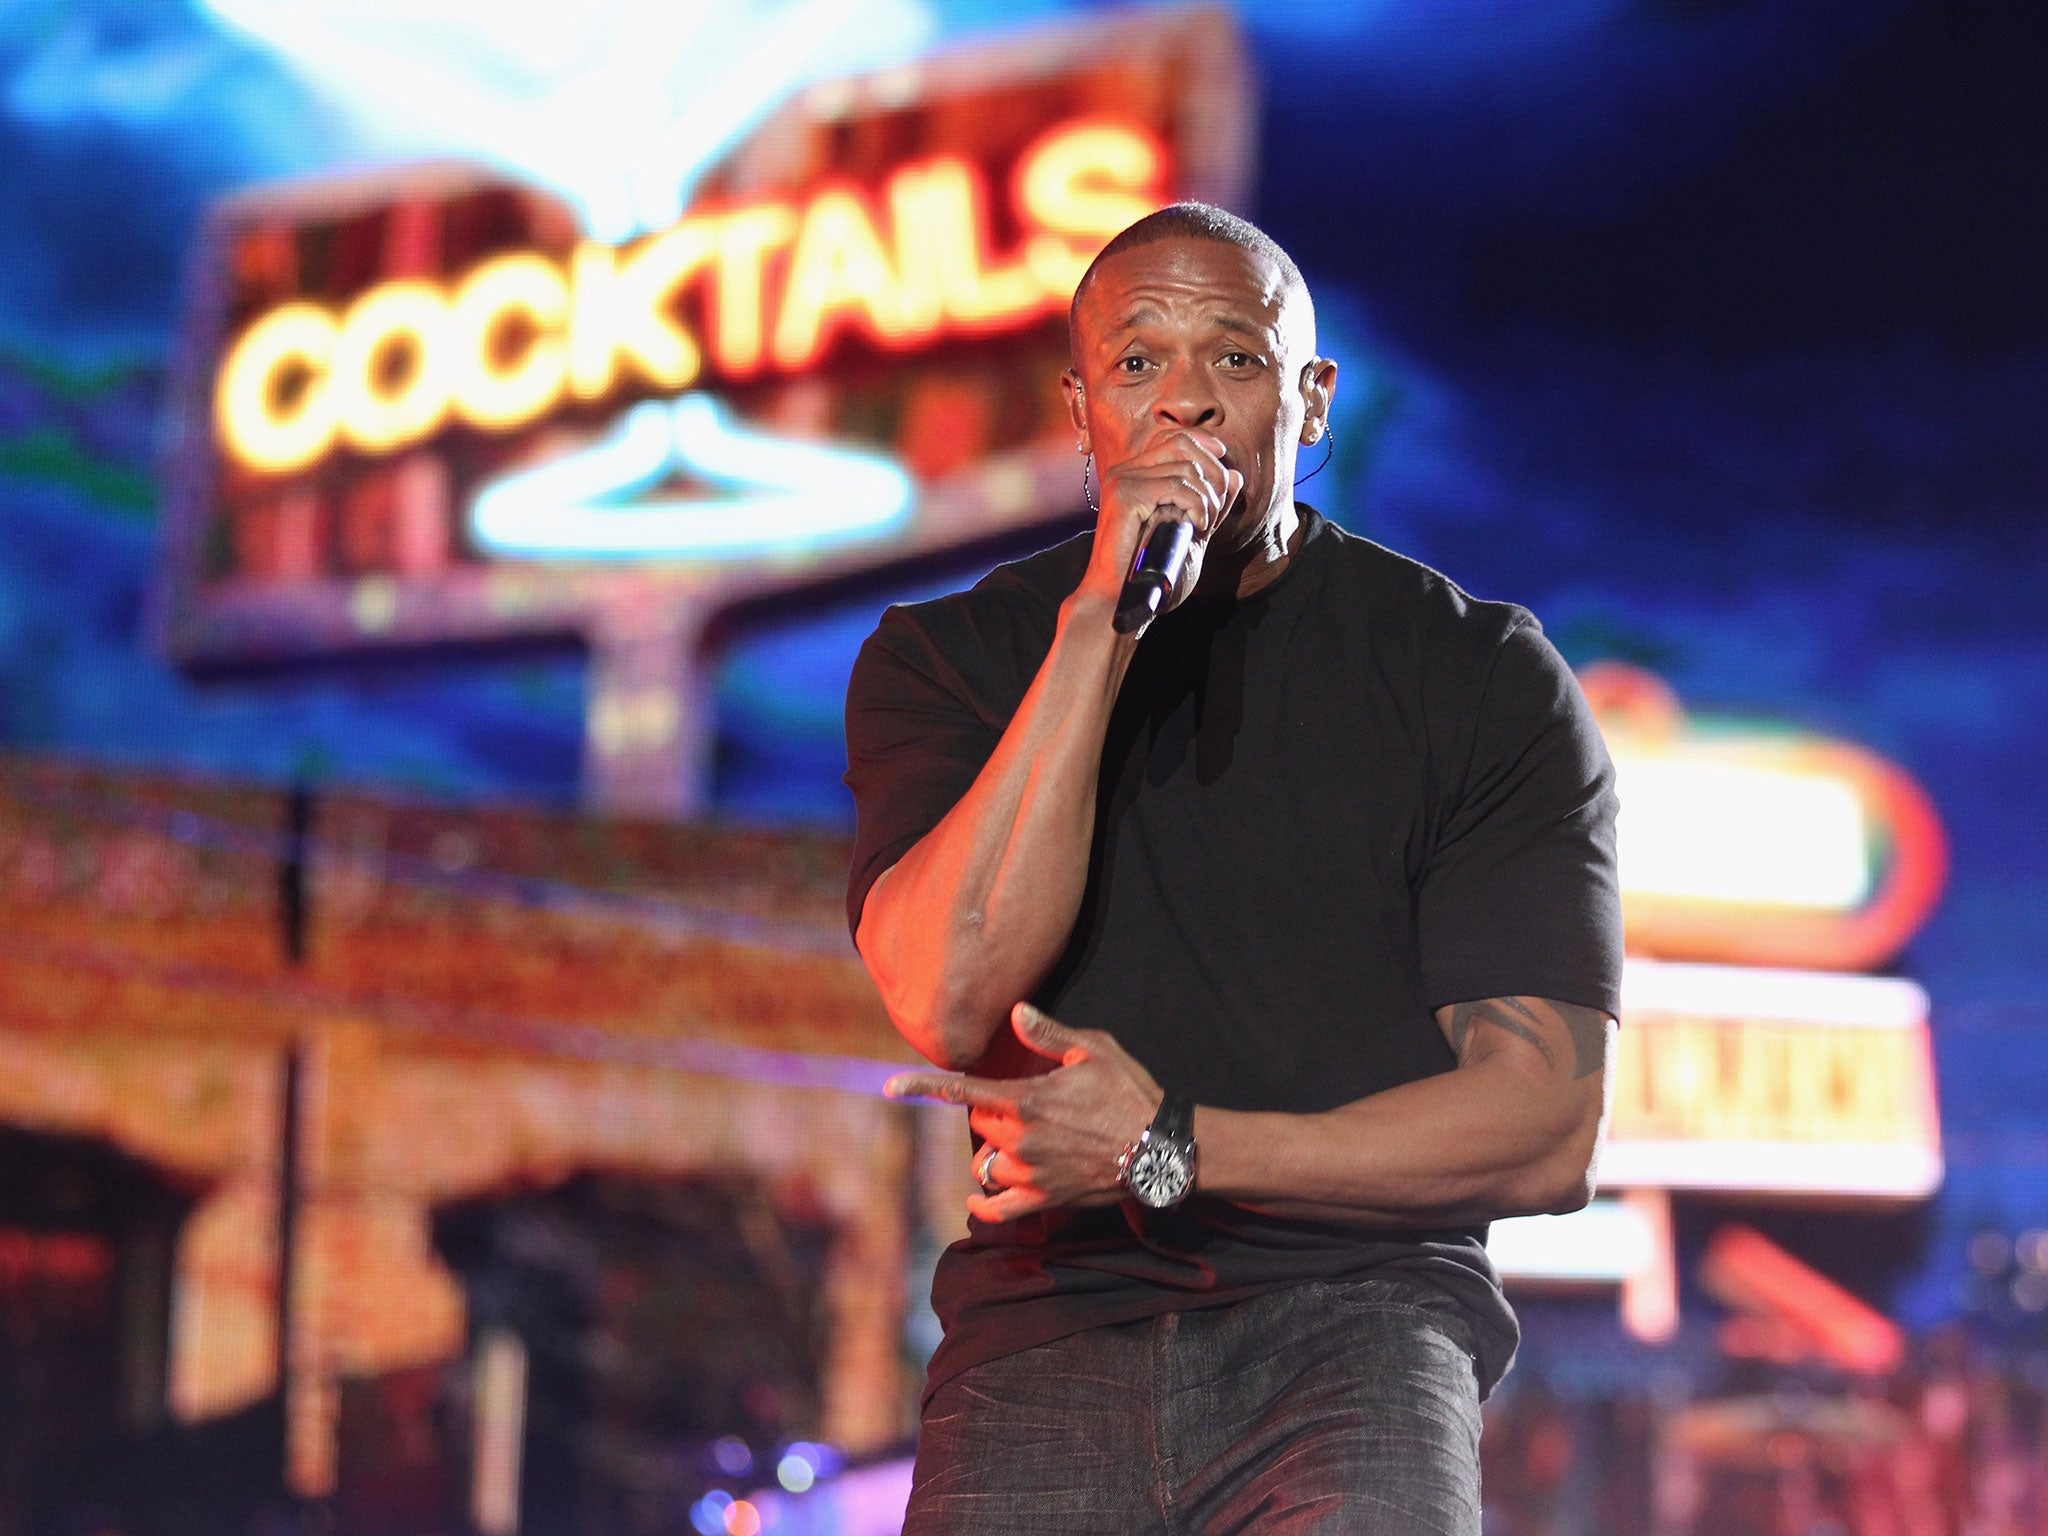 Dr Dre has topped Forbes' highest paid musicians in the world list for 2014